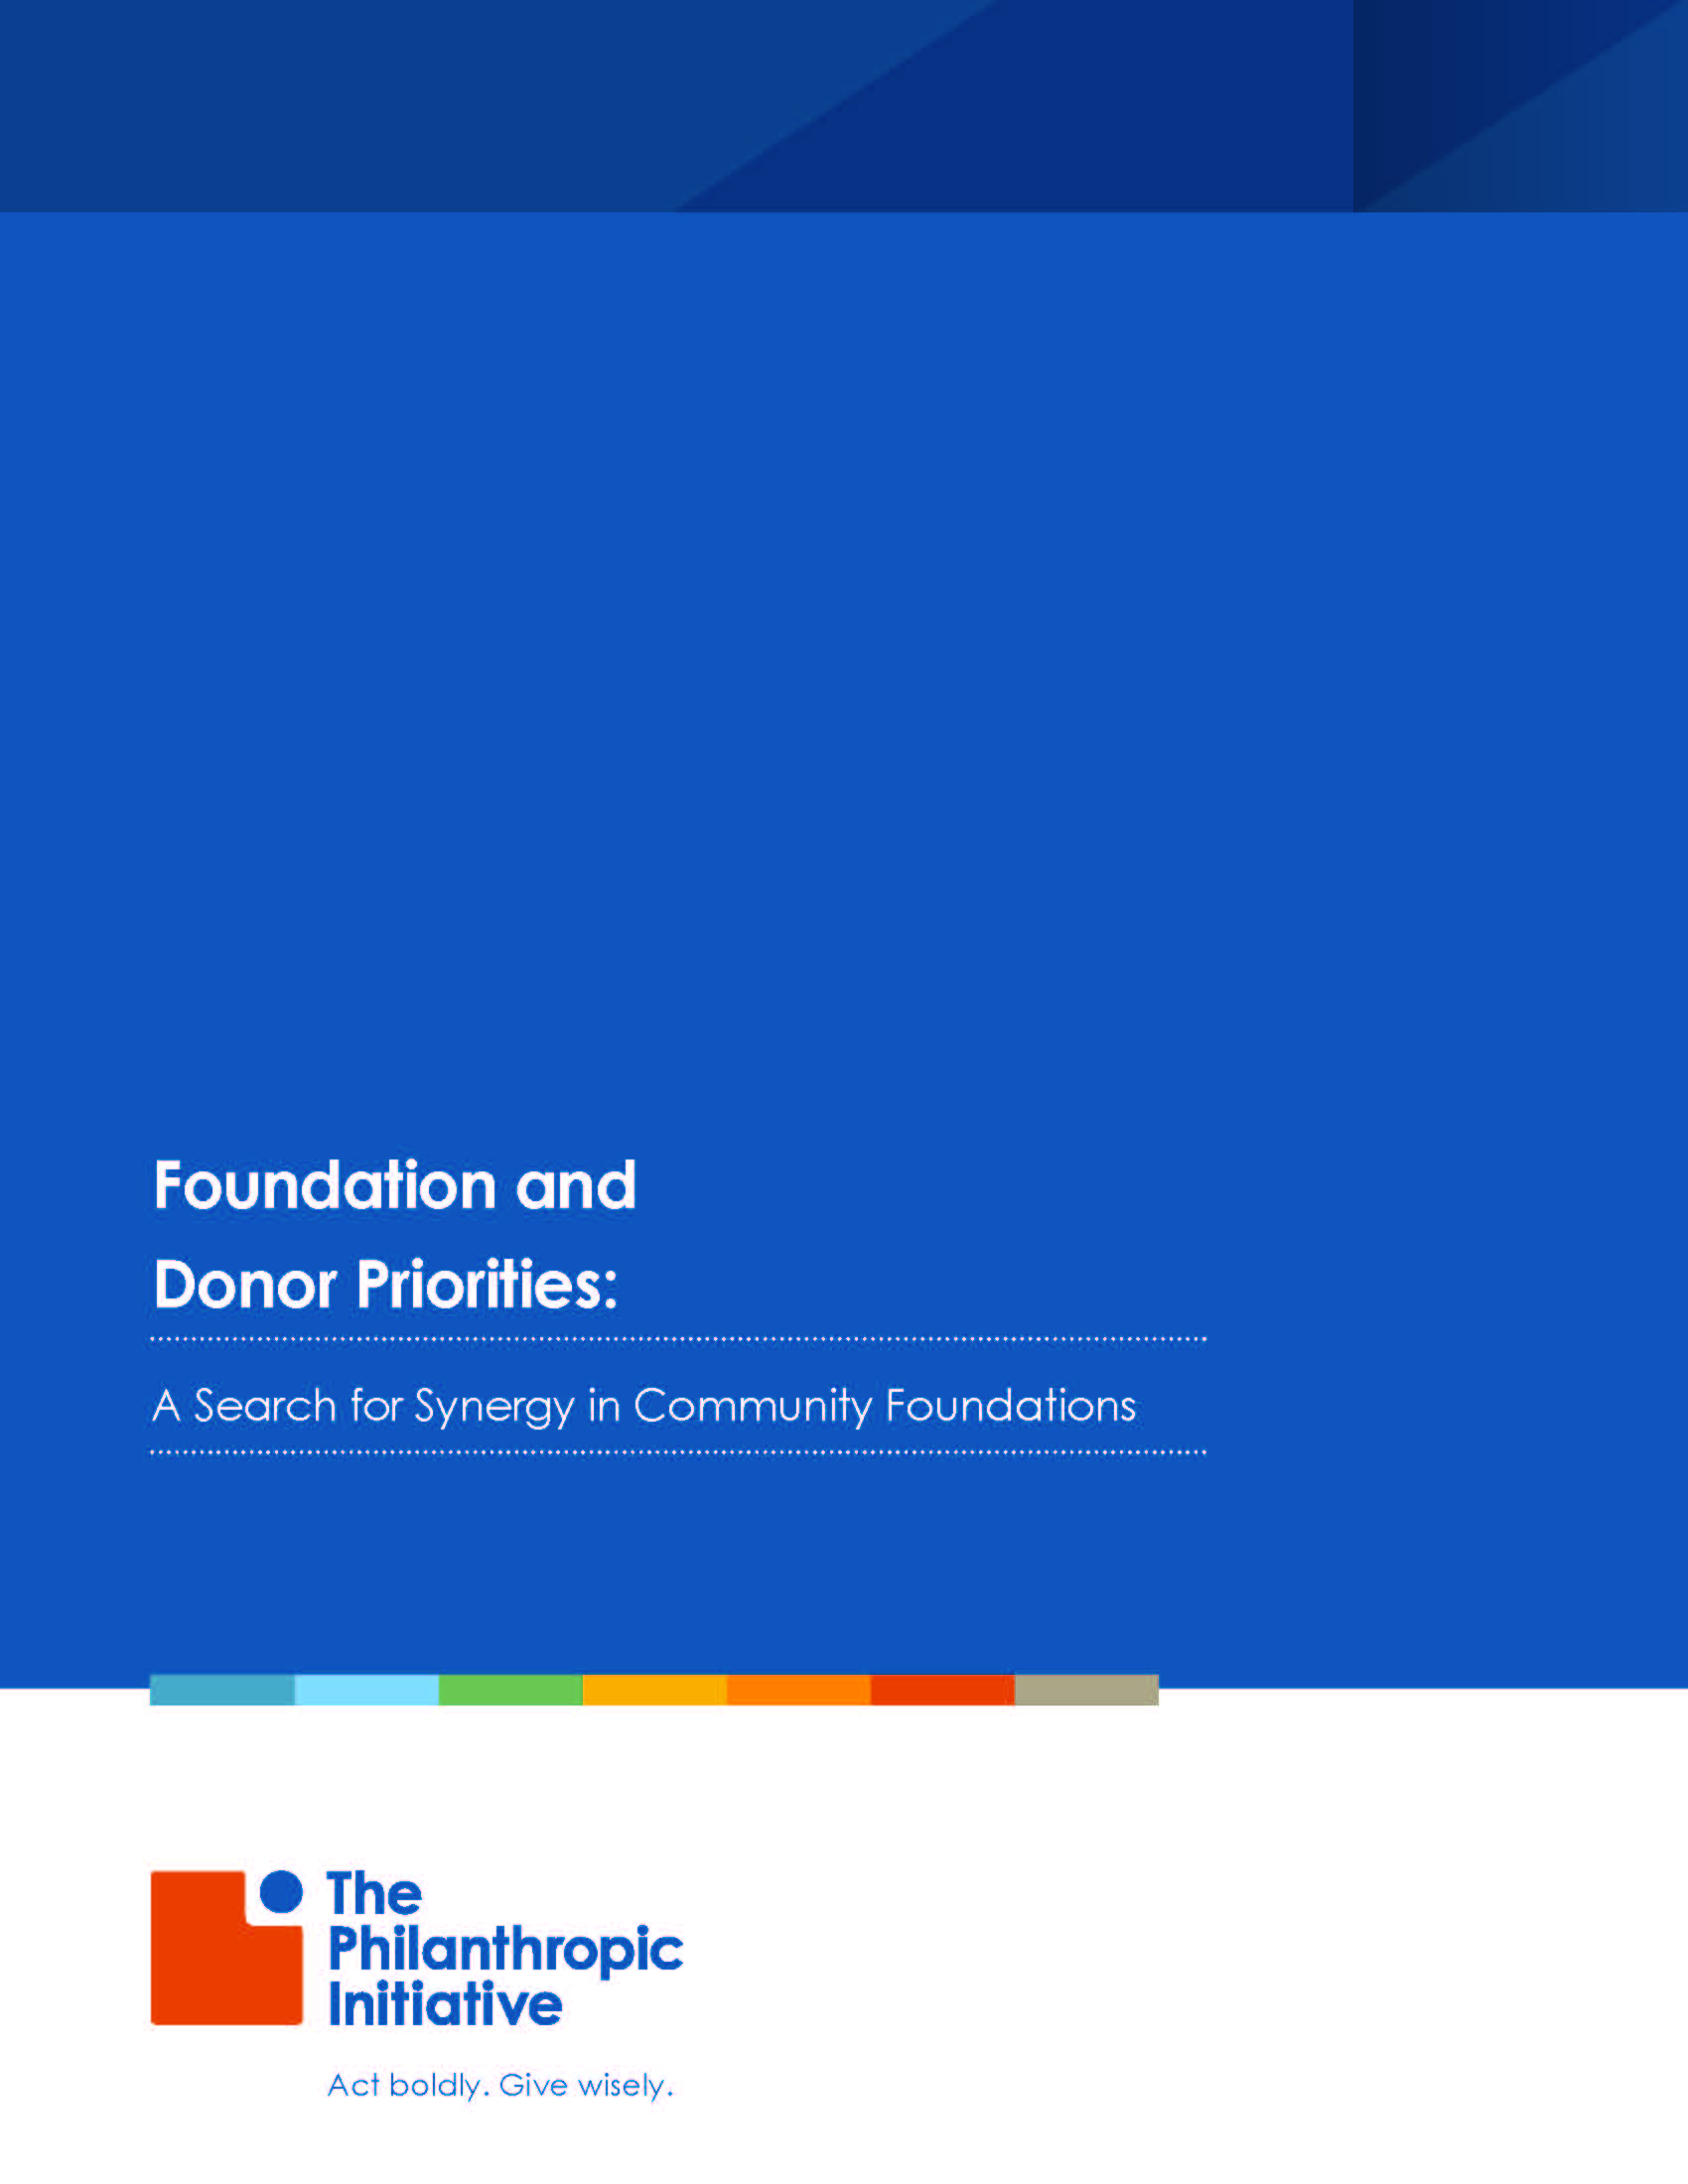 cover_of_tpi_foundation_and_donor_priorities_report